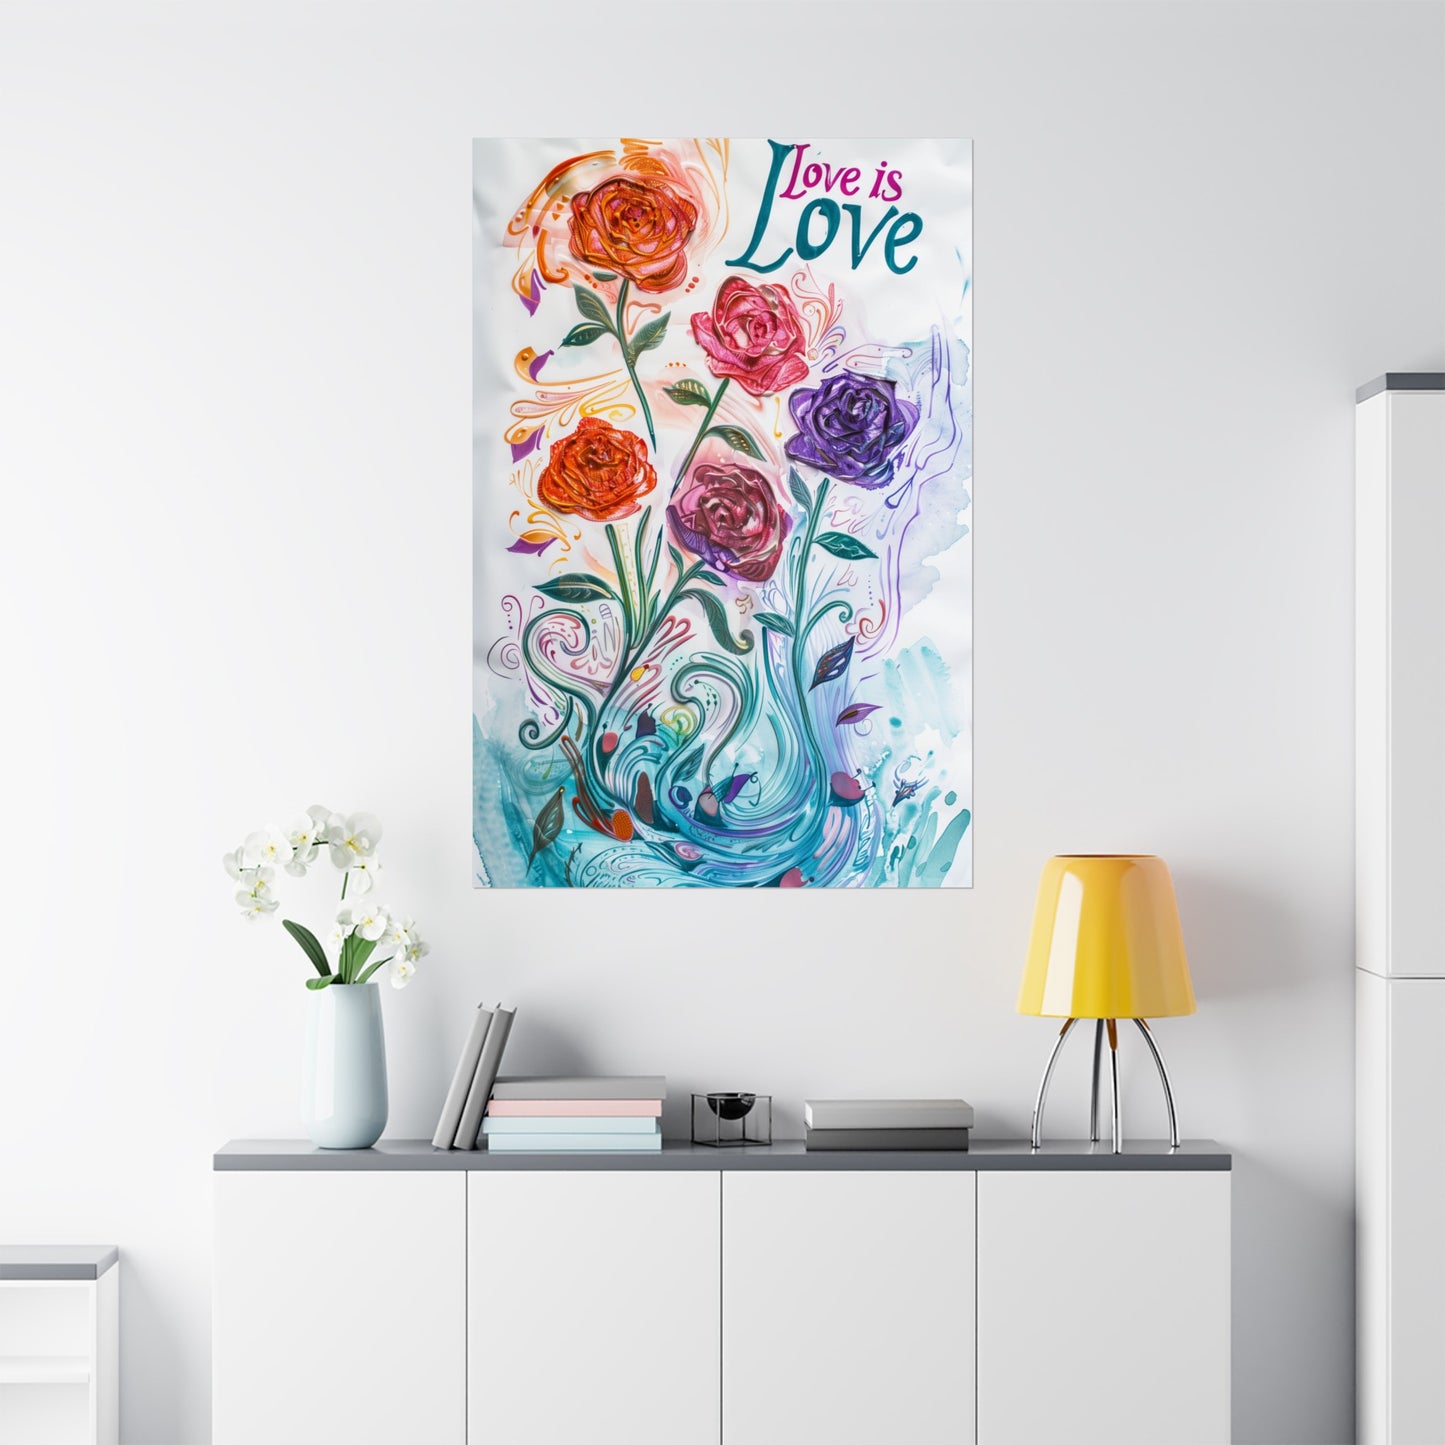 Love is Love Matte Poster Gorgeous Wall Art for Home Office or Dorm Decor